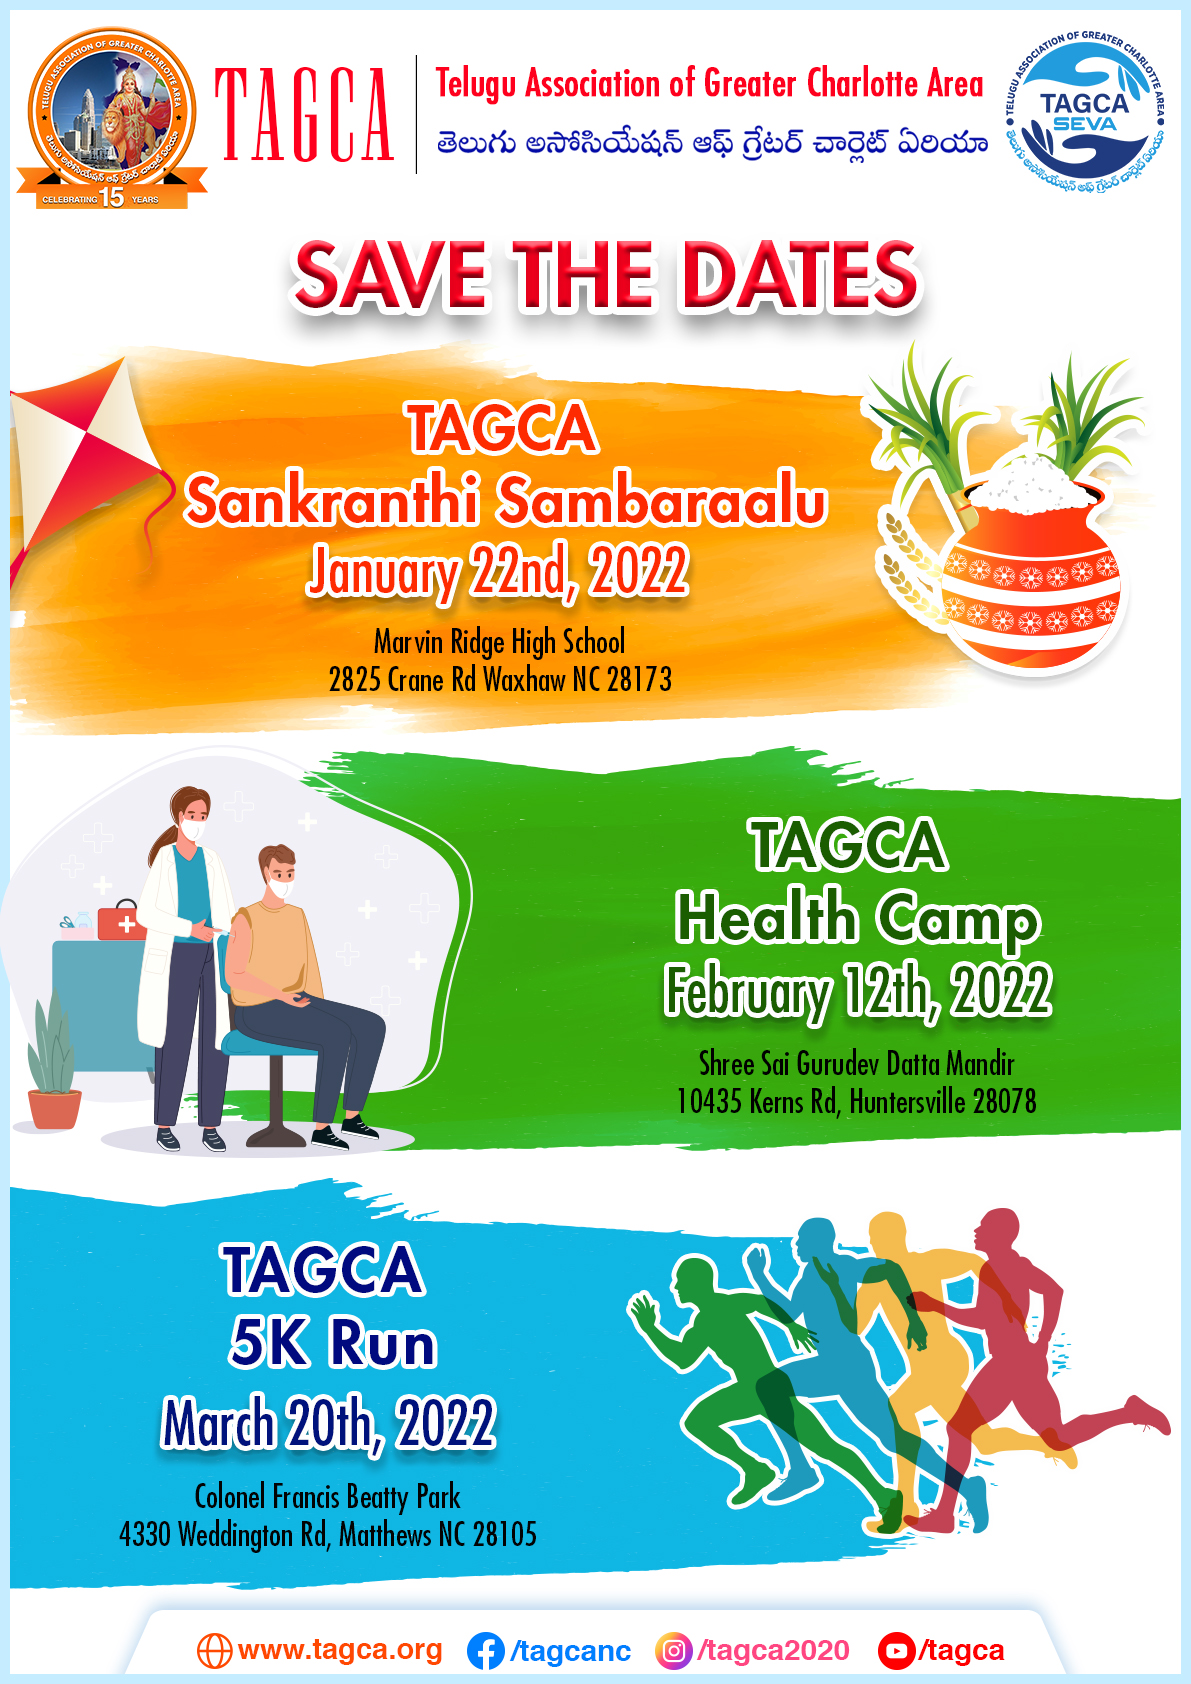 TAGCA Upcoming Events